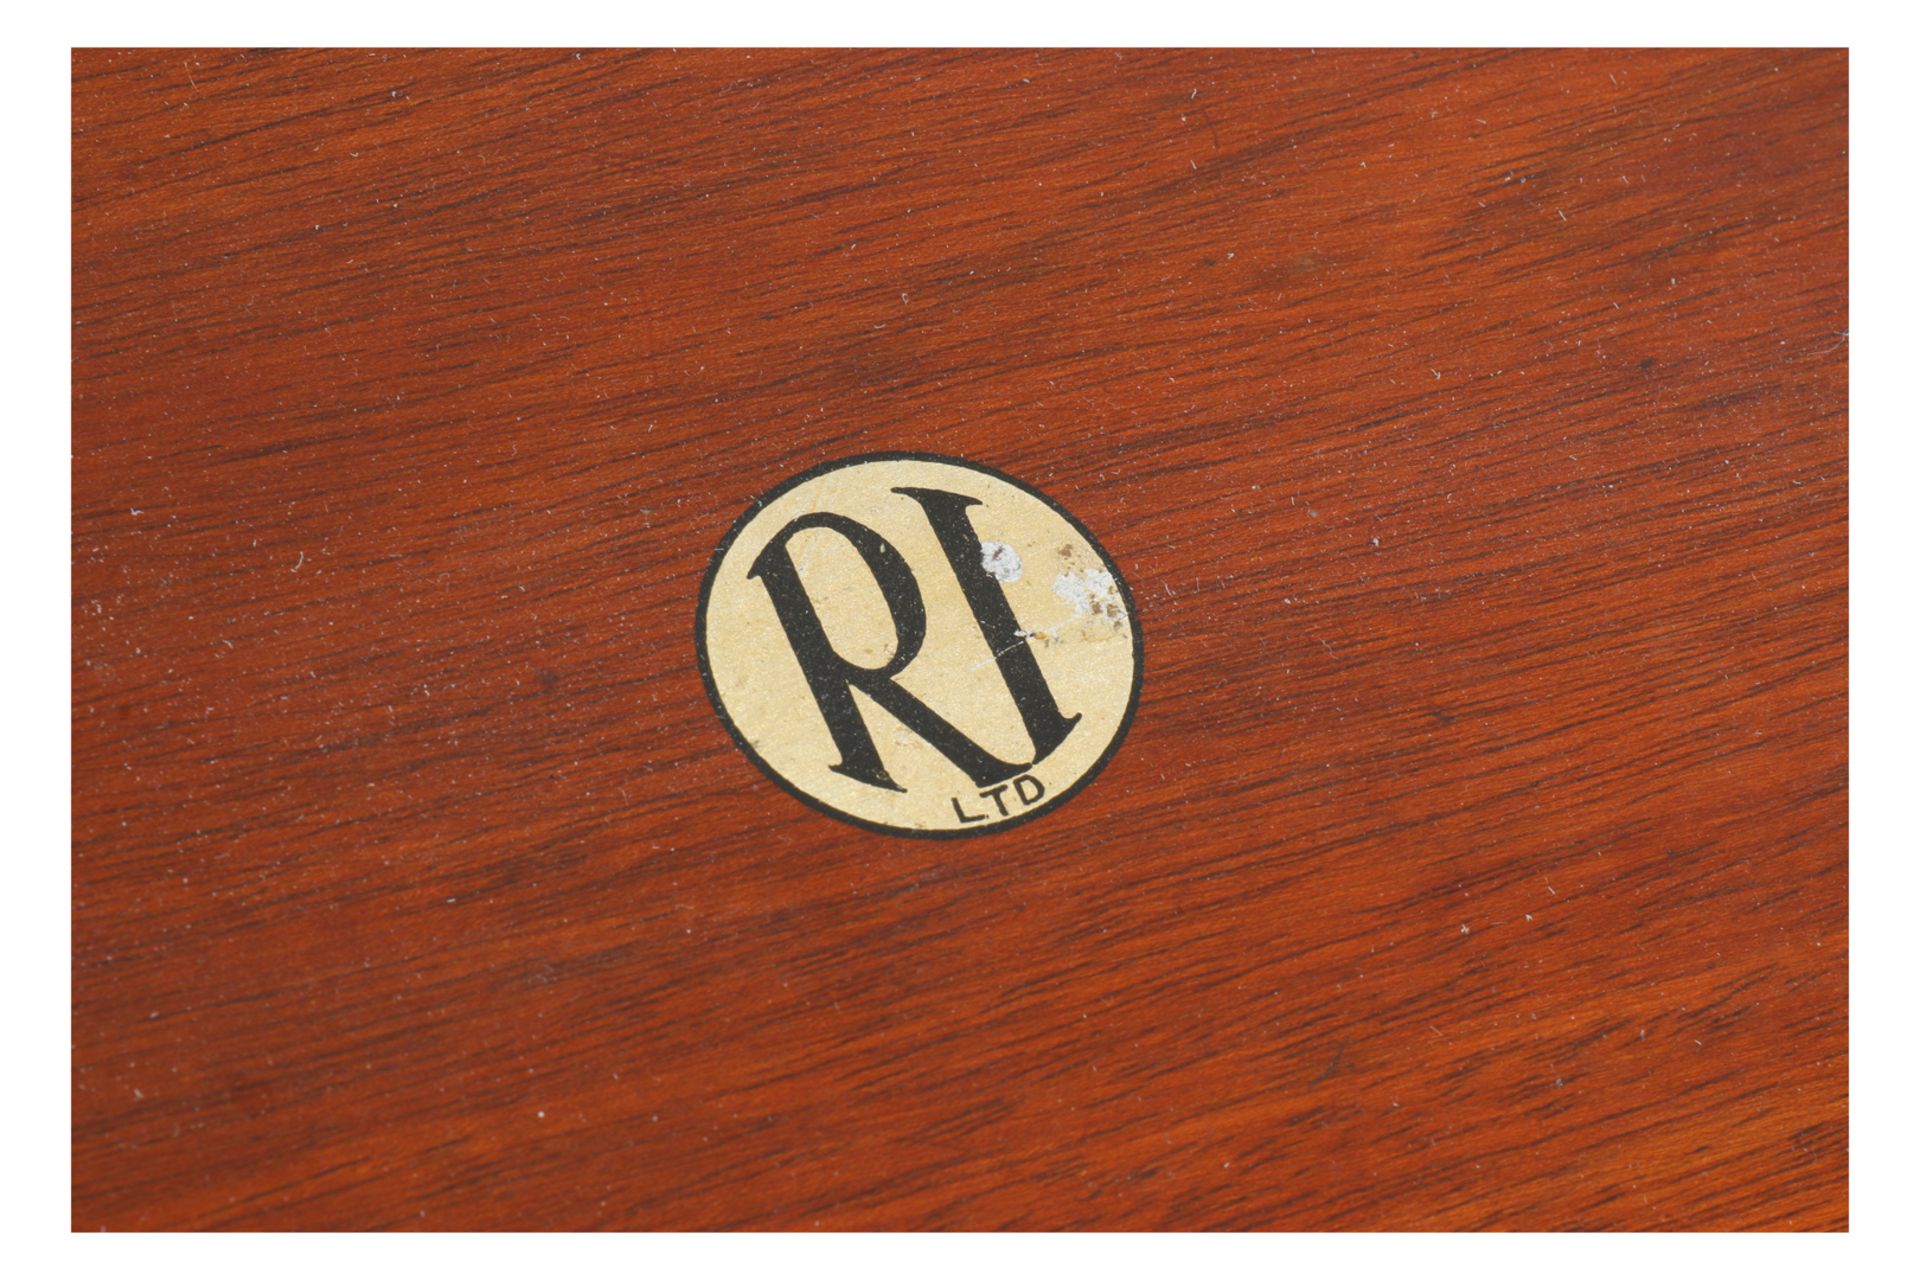 1922 RADIO INSTRUMENT (RI) 5 valves receiving set, varnished Mahogany cabinet with slope lid to - Image 5 of 5